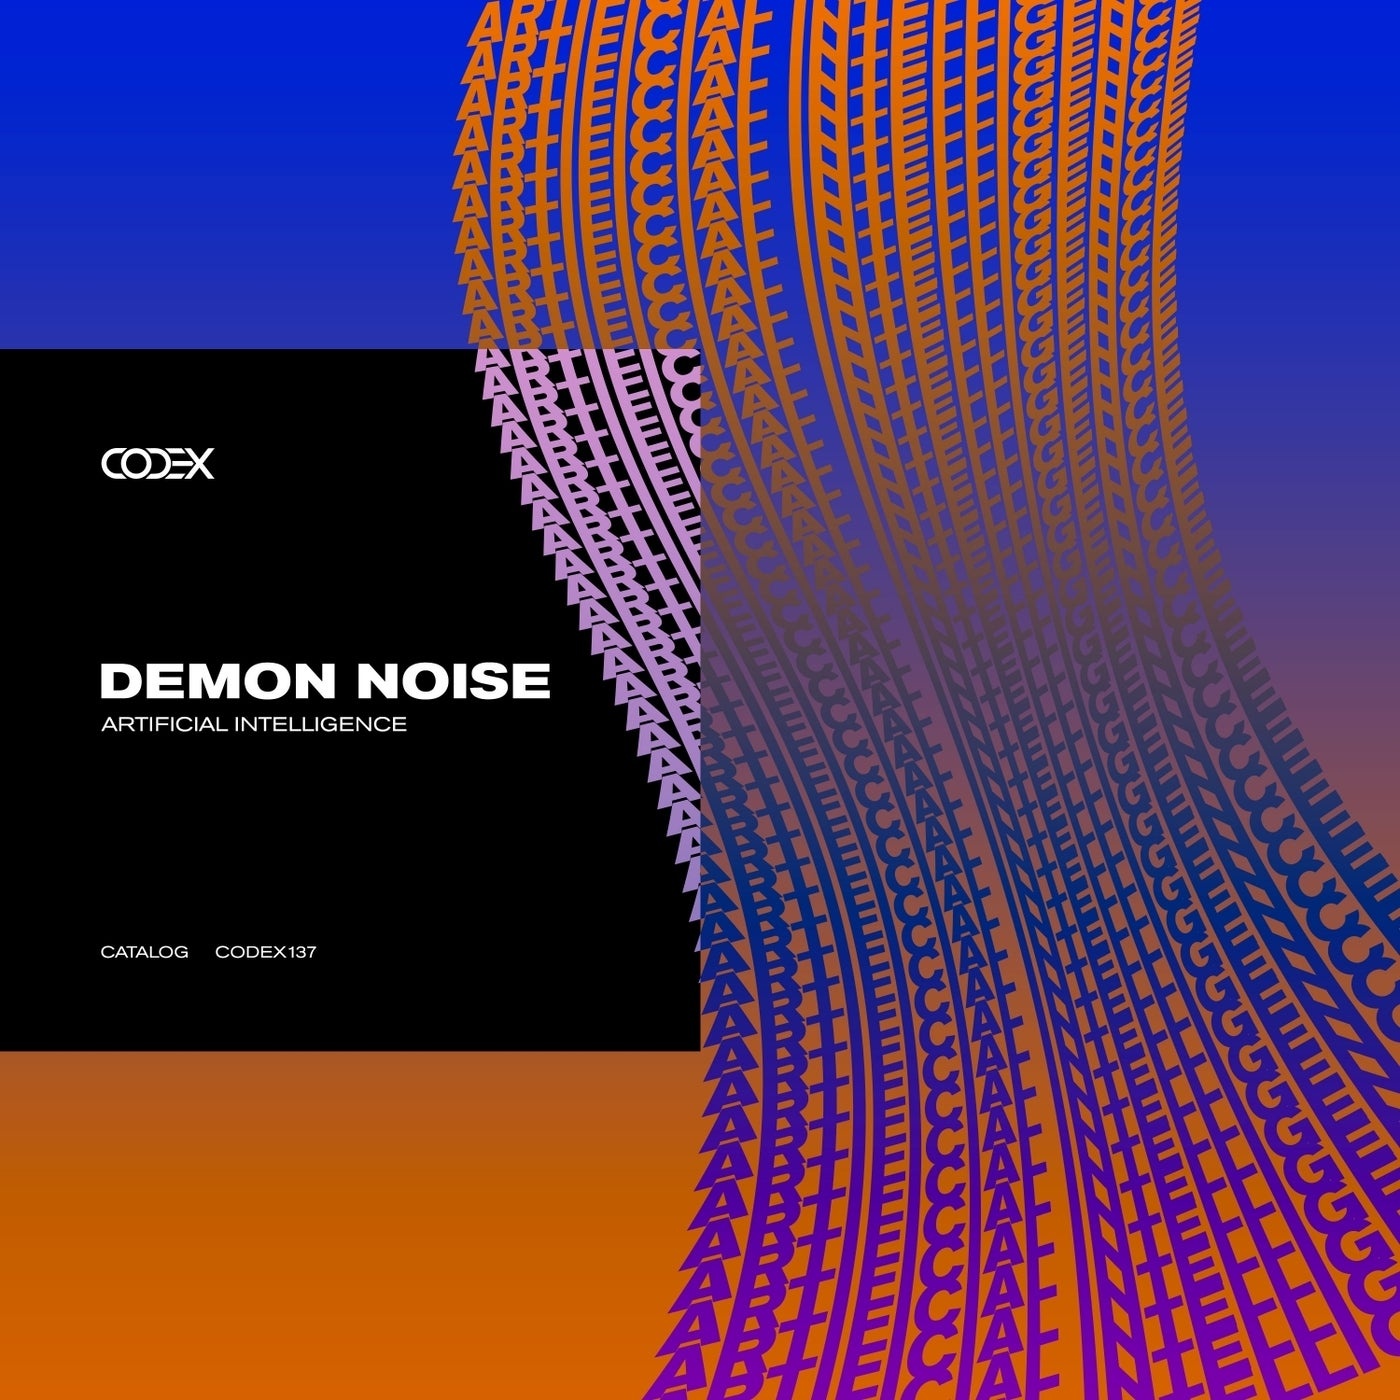 image cover: Demon Noise - Artificial Intelligence / CODEX137